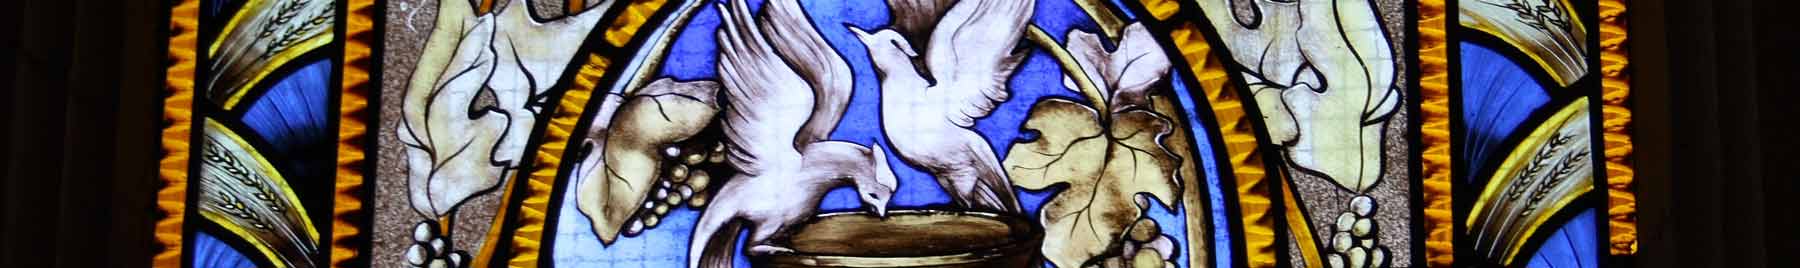 Stained glass window in blue and tan with doves drinking from a fountain in the center.